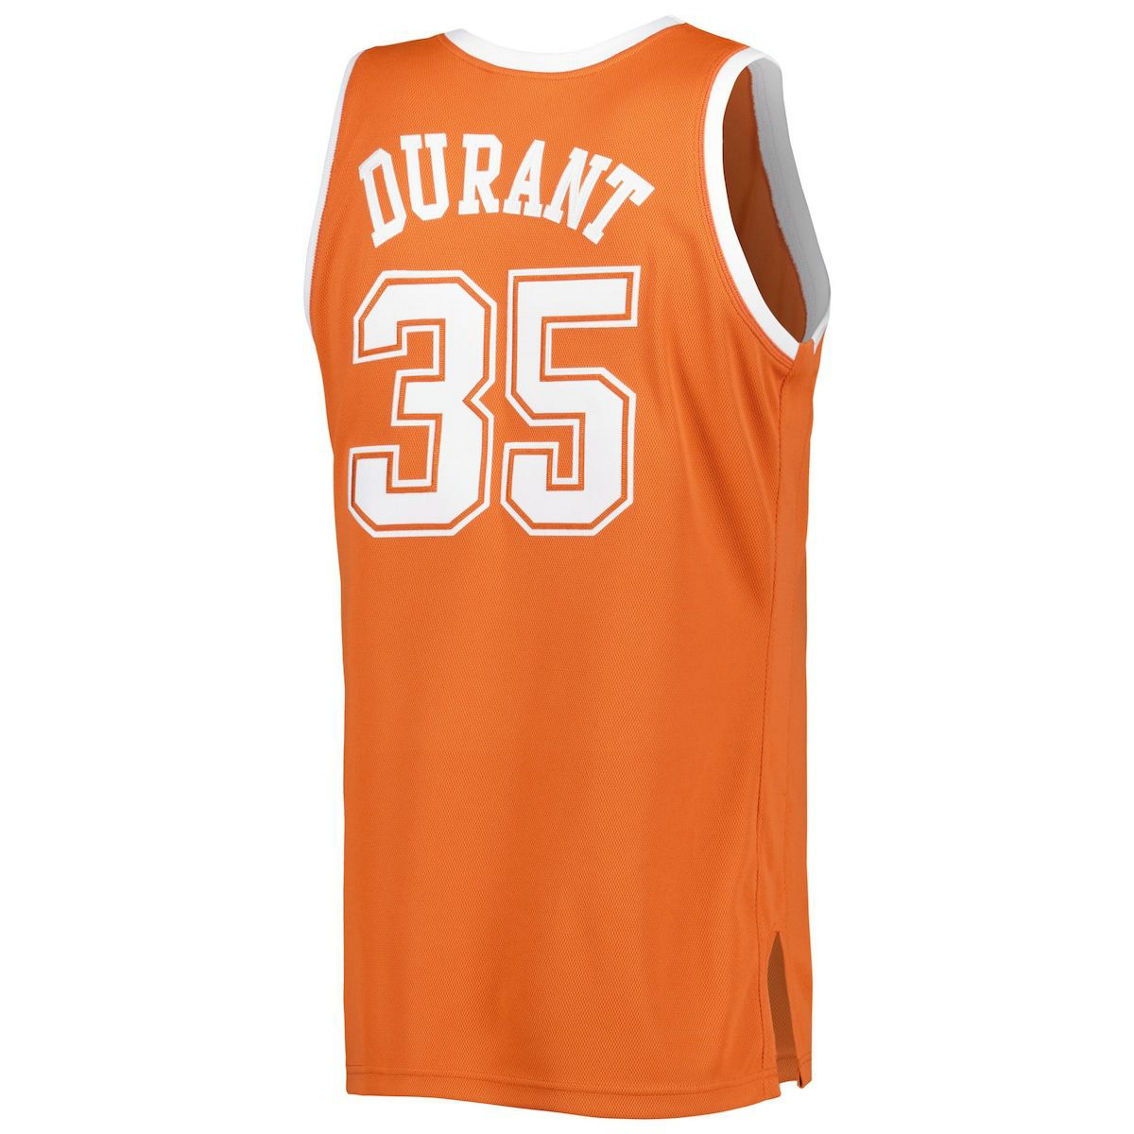 Mitchell & Ness Men's Kevin Durant Texas Orange Texas Longhorns Throwback Jersey - Image 4 of 4